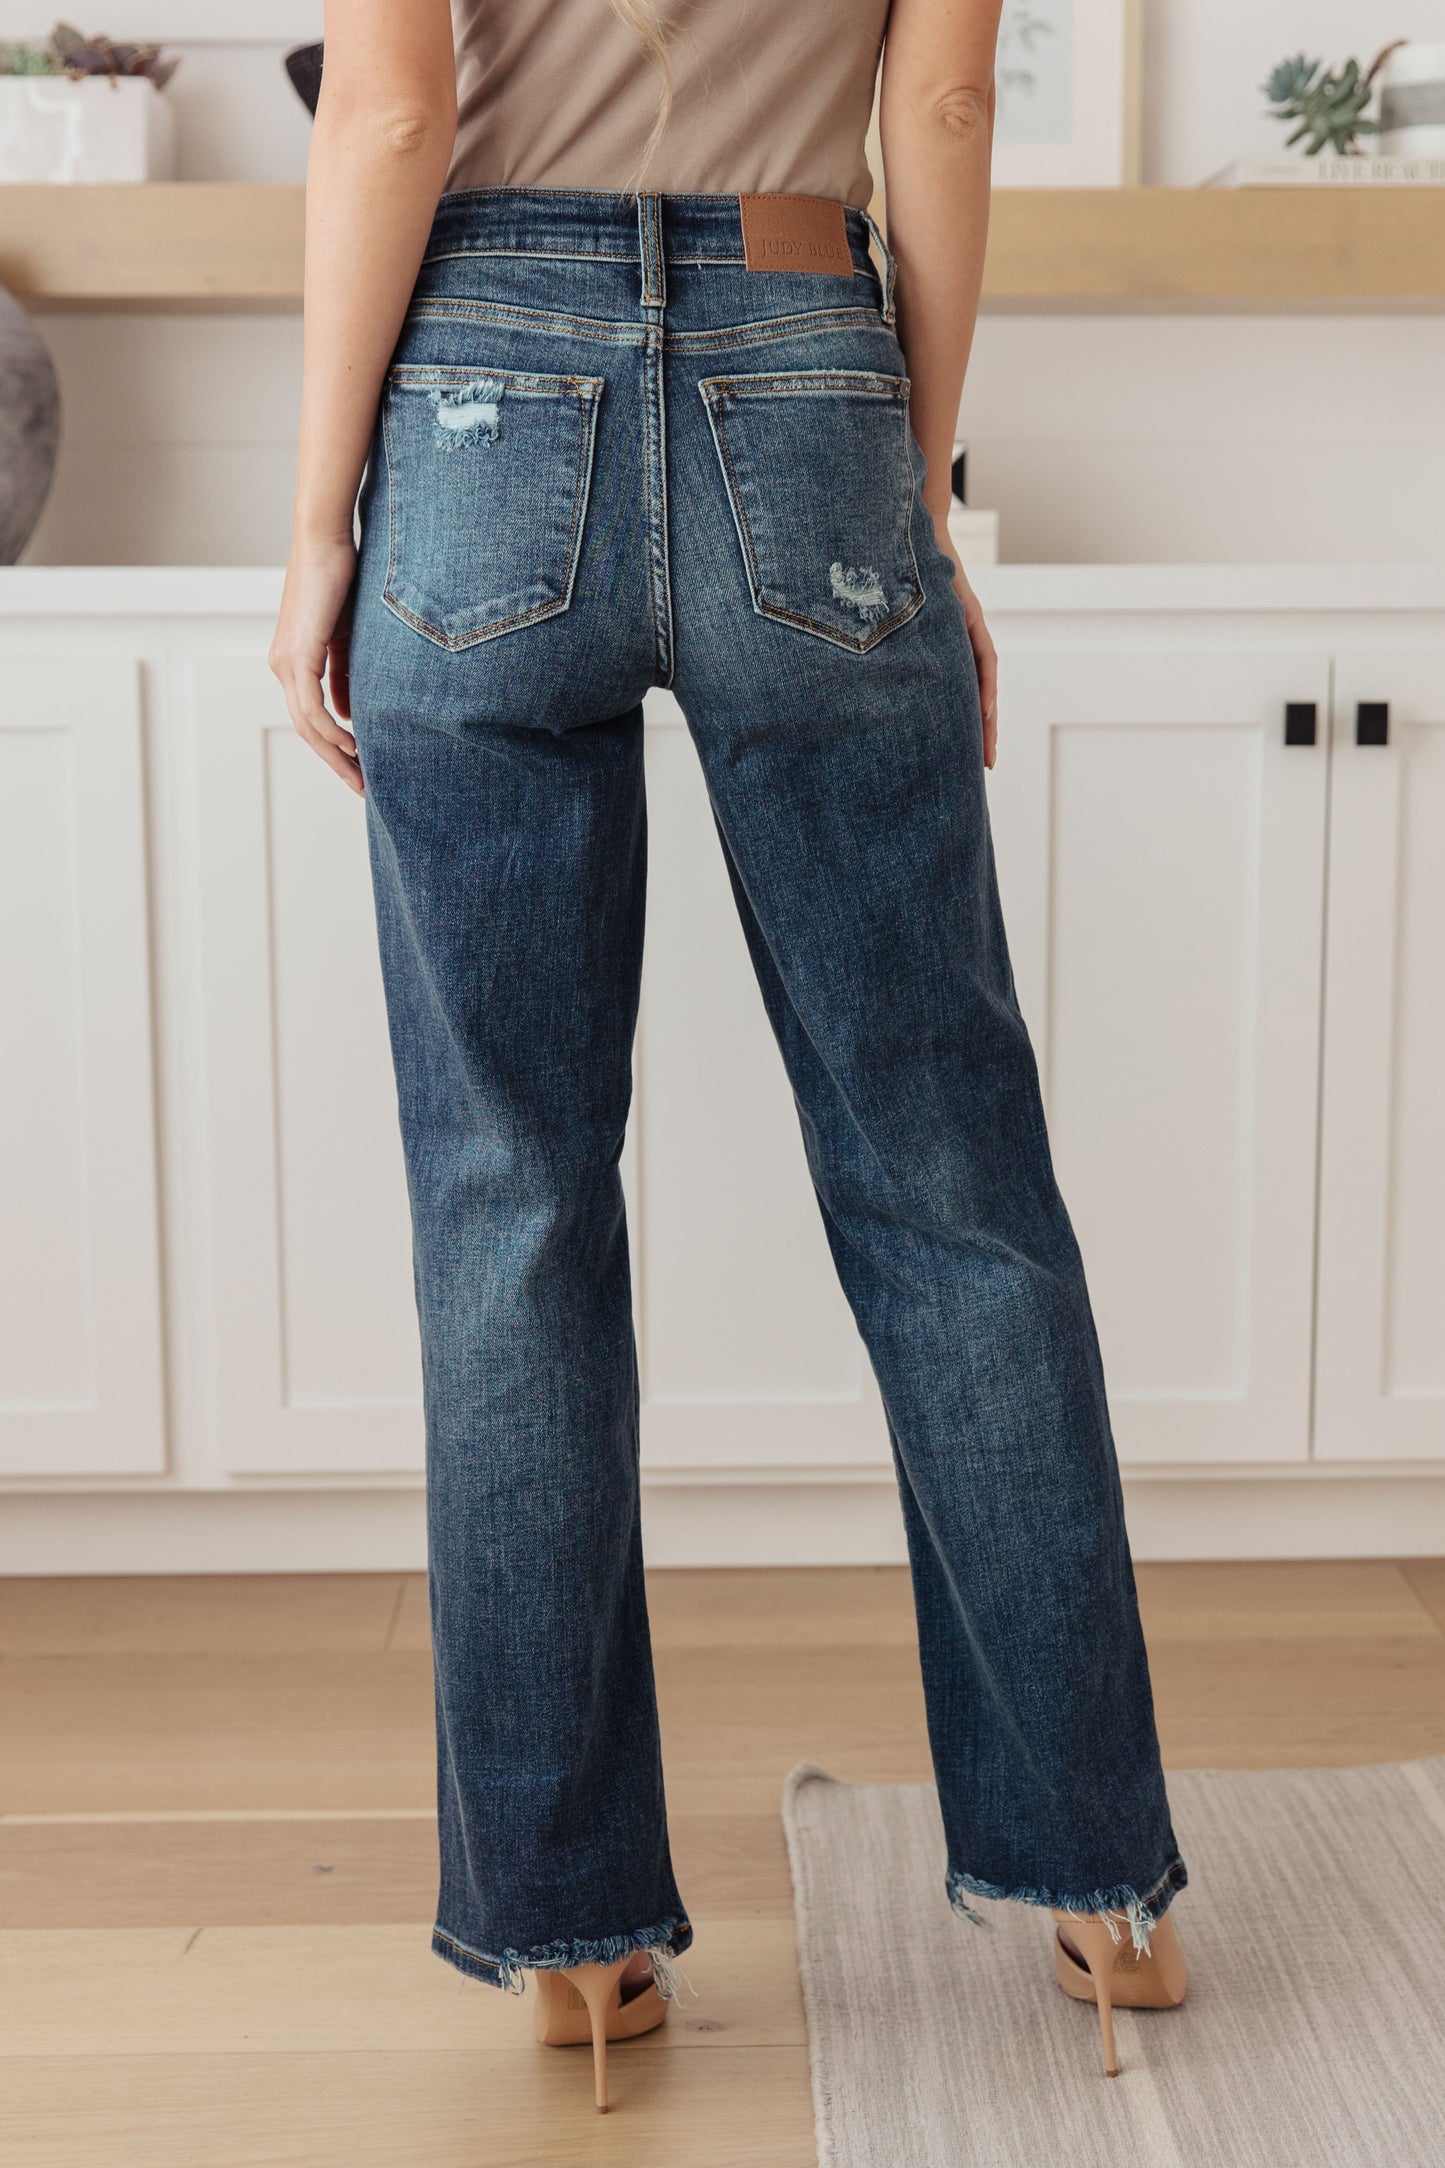 Your best outfits start with the Rose High Rise 90's Straight Jeans! Featuring a stretchy, dark wash denim that shapes a high rise waist with five pocket cut and zipper fly. 90's Straight cut pant legs end with chewed hems with distressing at the knees. 0-24-24W